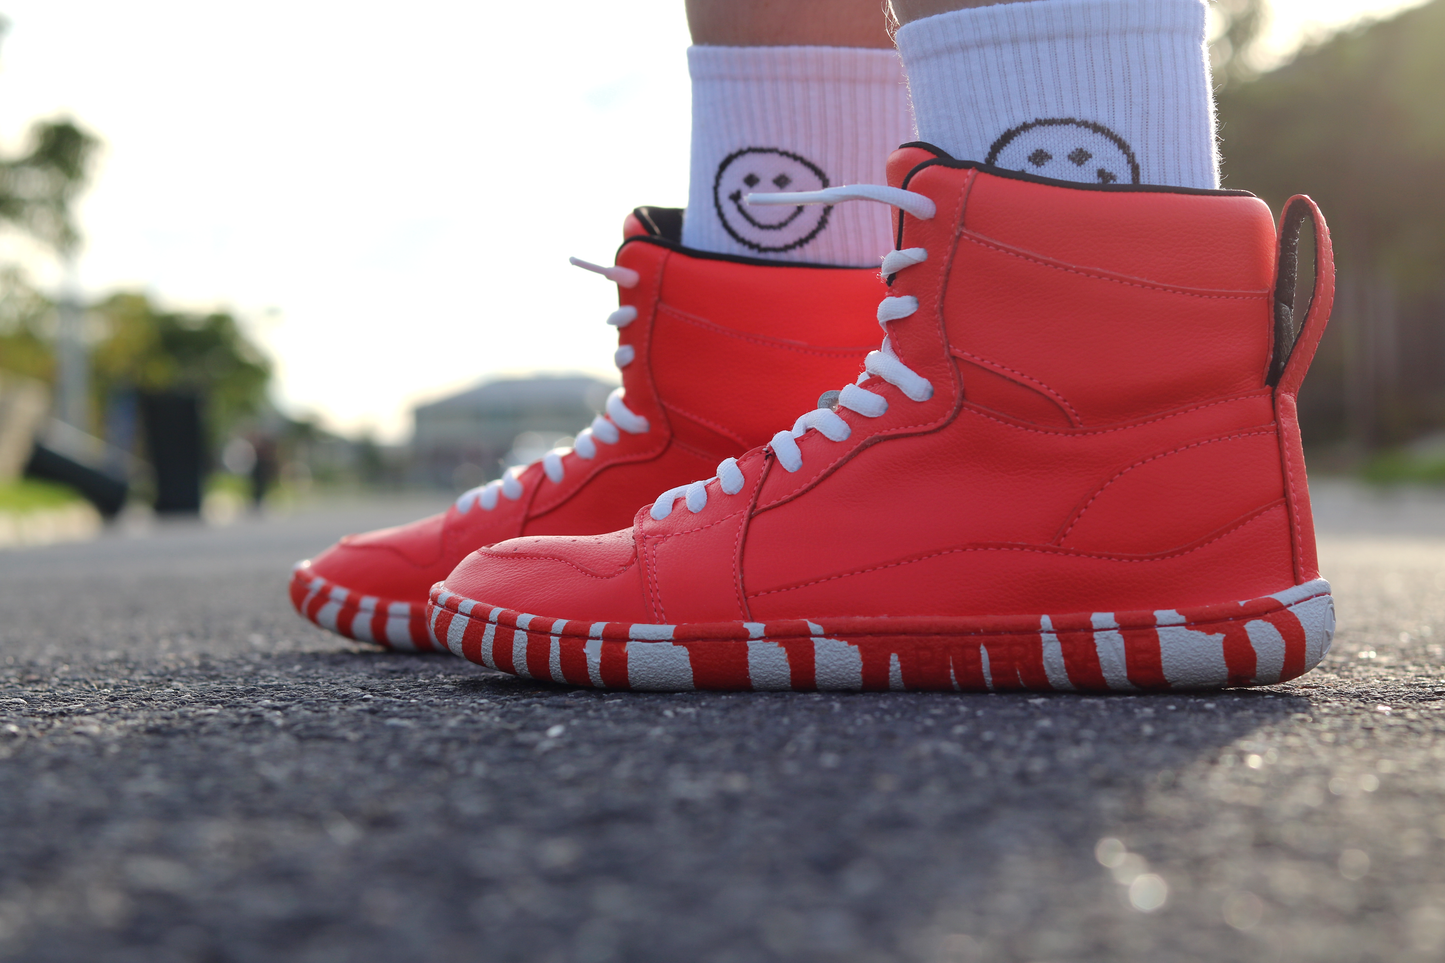 CANDY CANE HIGH TOPS ON THE STREET ON FEET